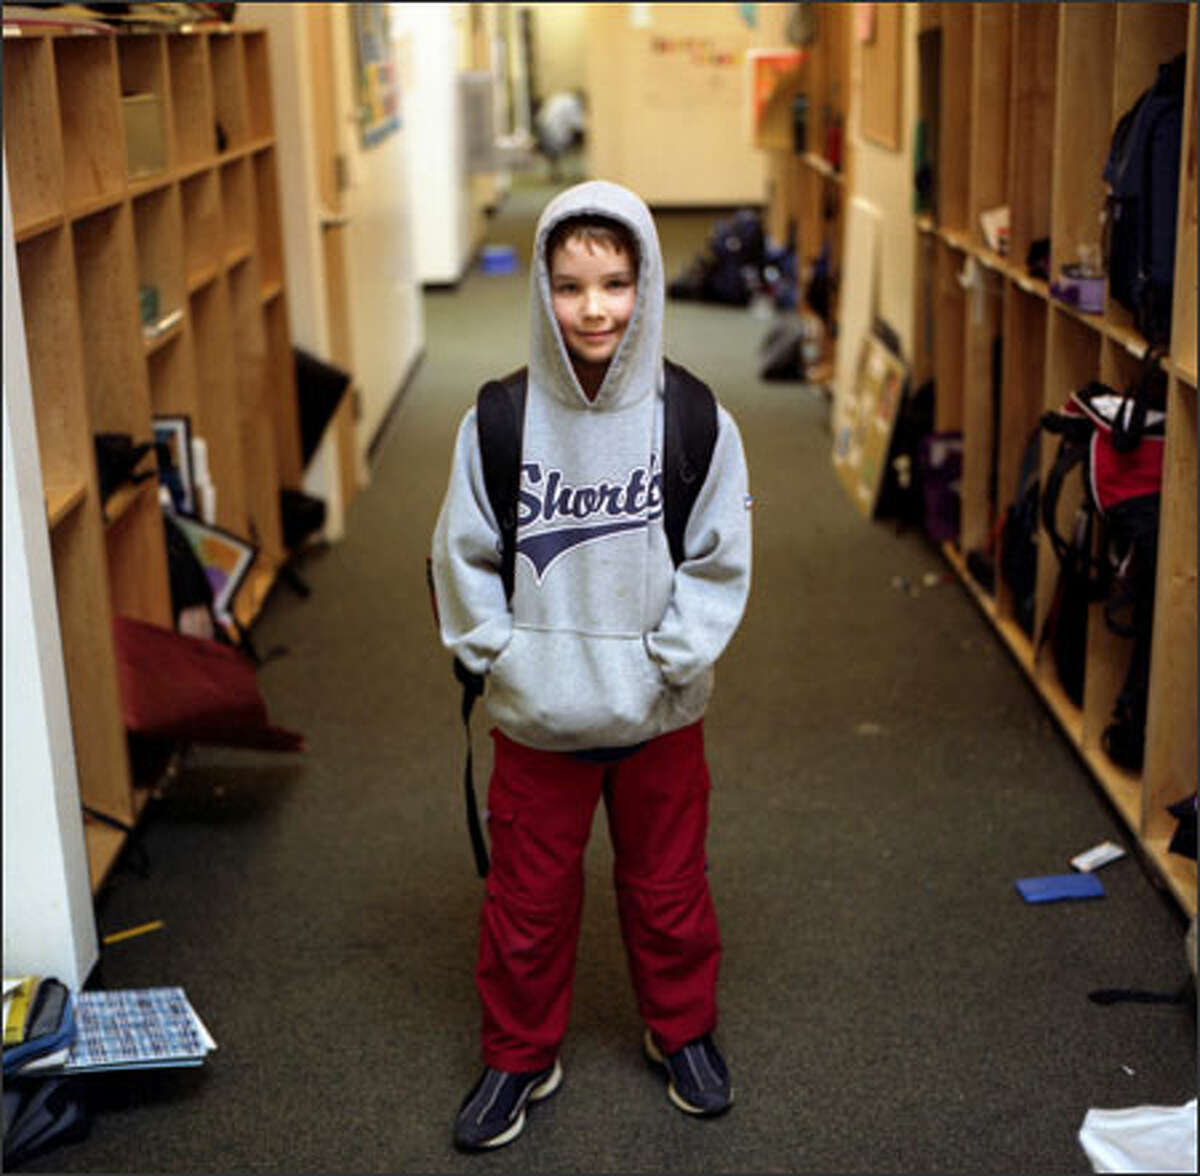 Ian Sobol, 10, was one of 18 Seattleites we interviewed recently for their takes on what it means to be American in 2005: "Americans should care about their country more than war. Some people think war is cool but I think war is not cool because a lot of people die."